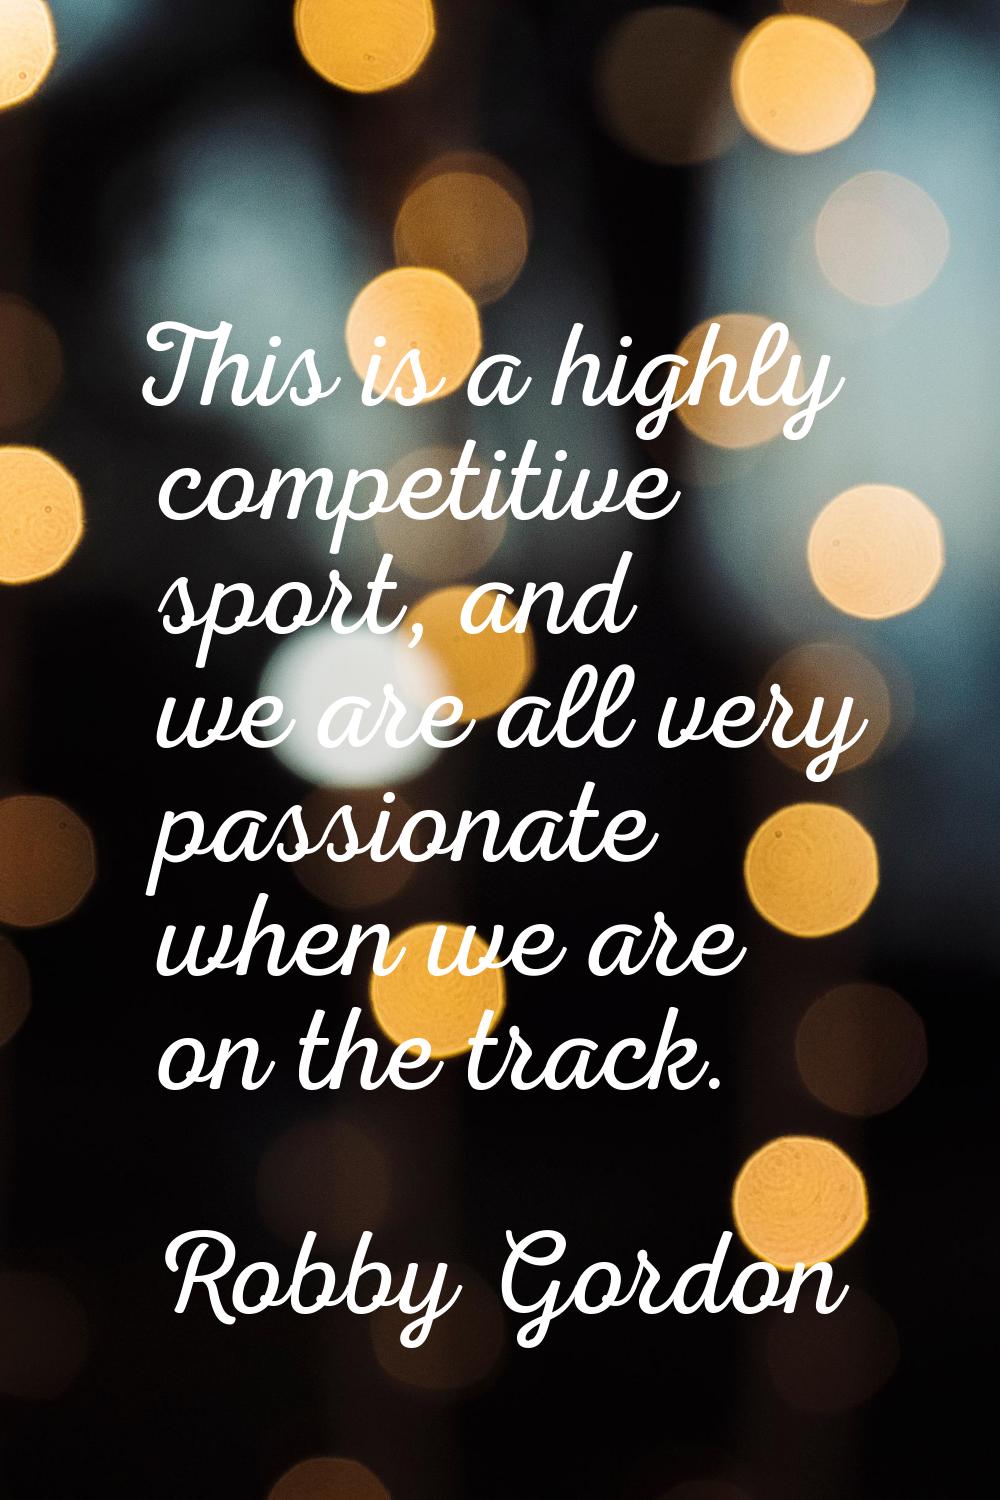 This is a highly competitive sport, and we are all very passionate when we are on the track.